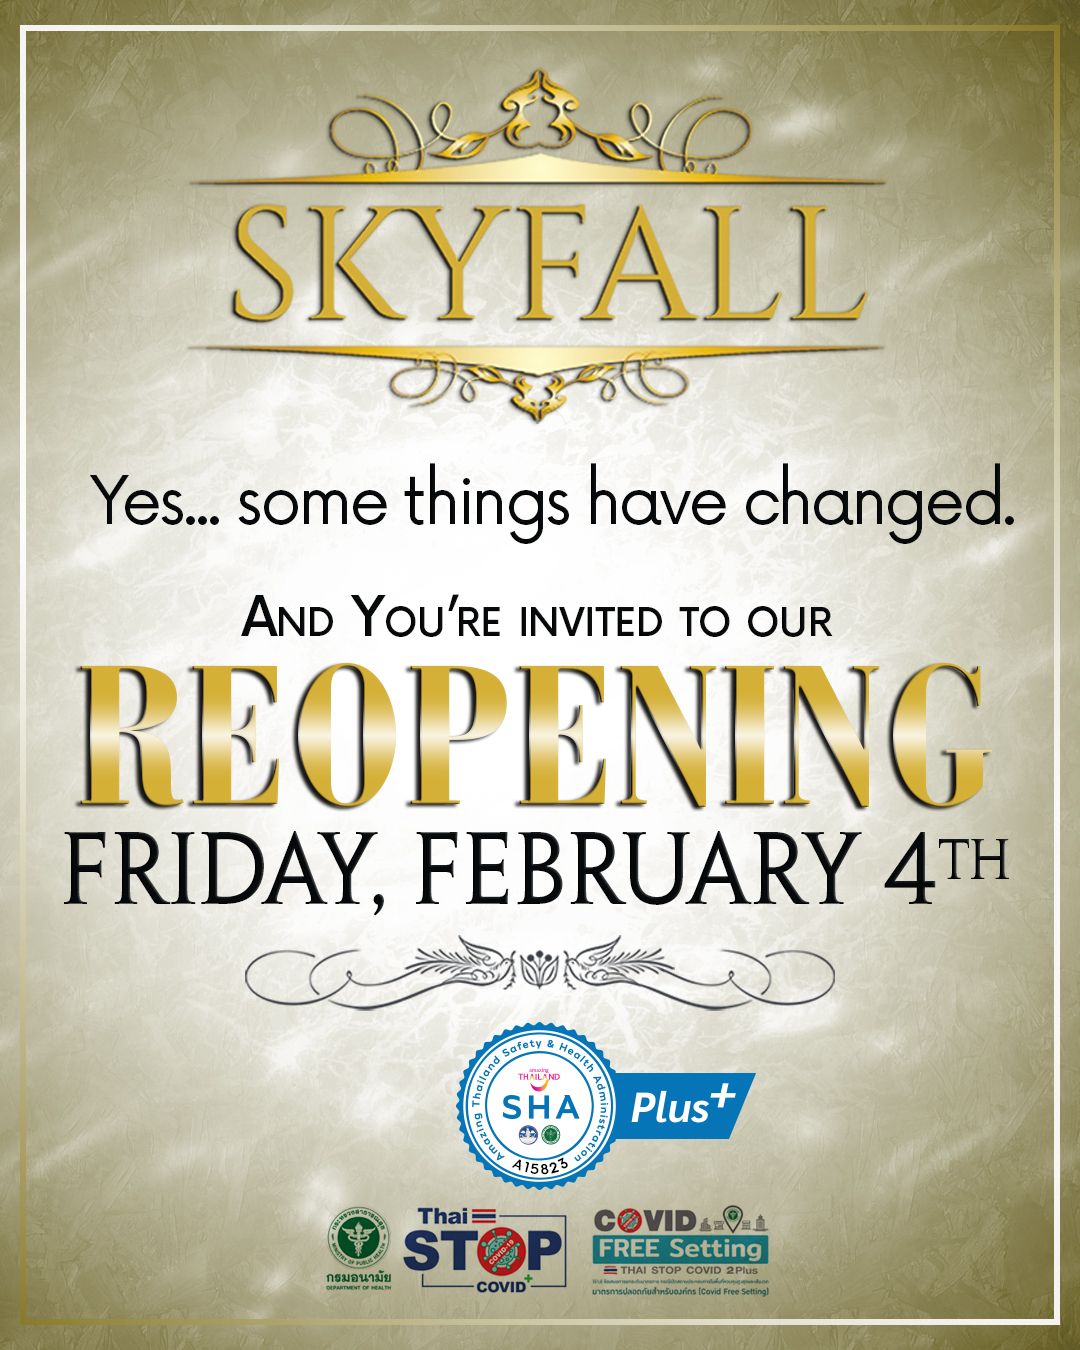 Skyfall reopens